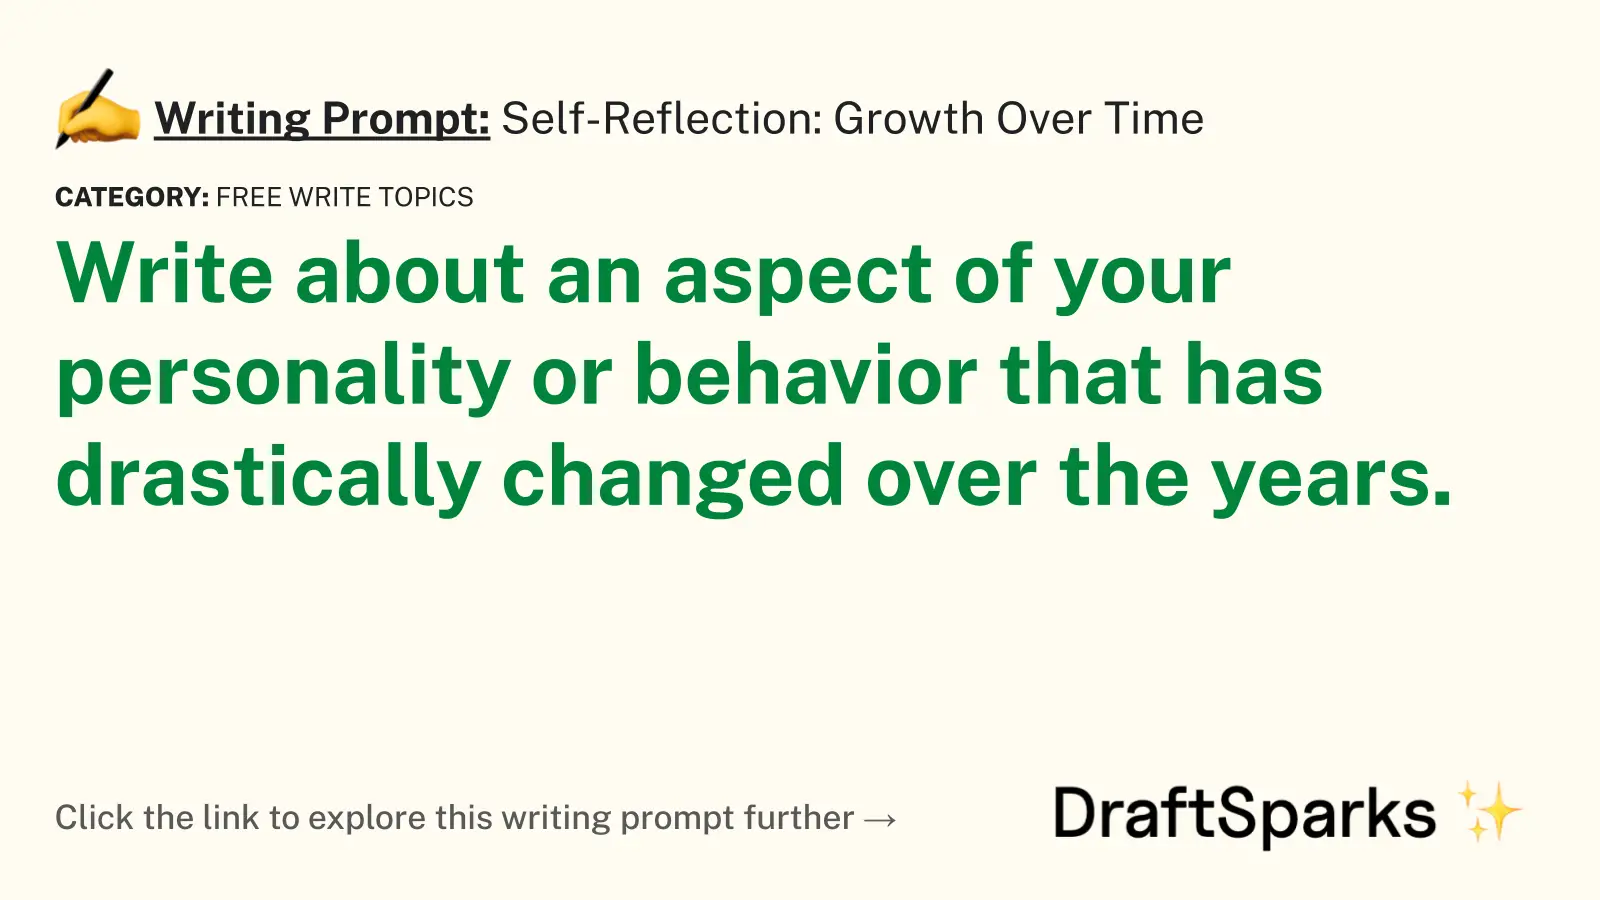 Self-Reflection: Growth Over Time